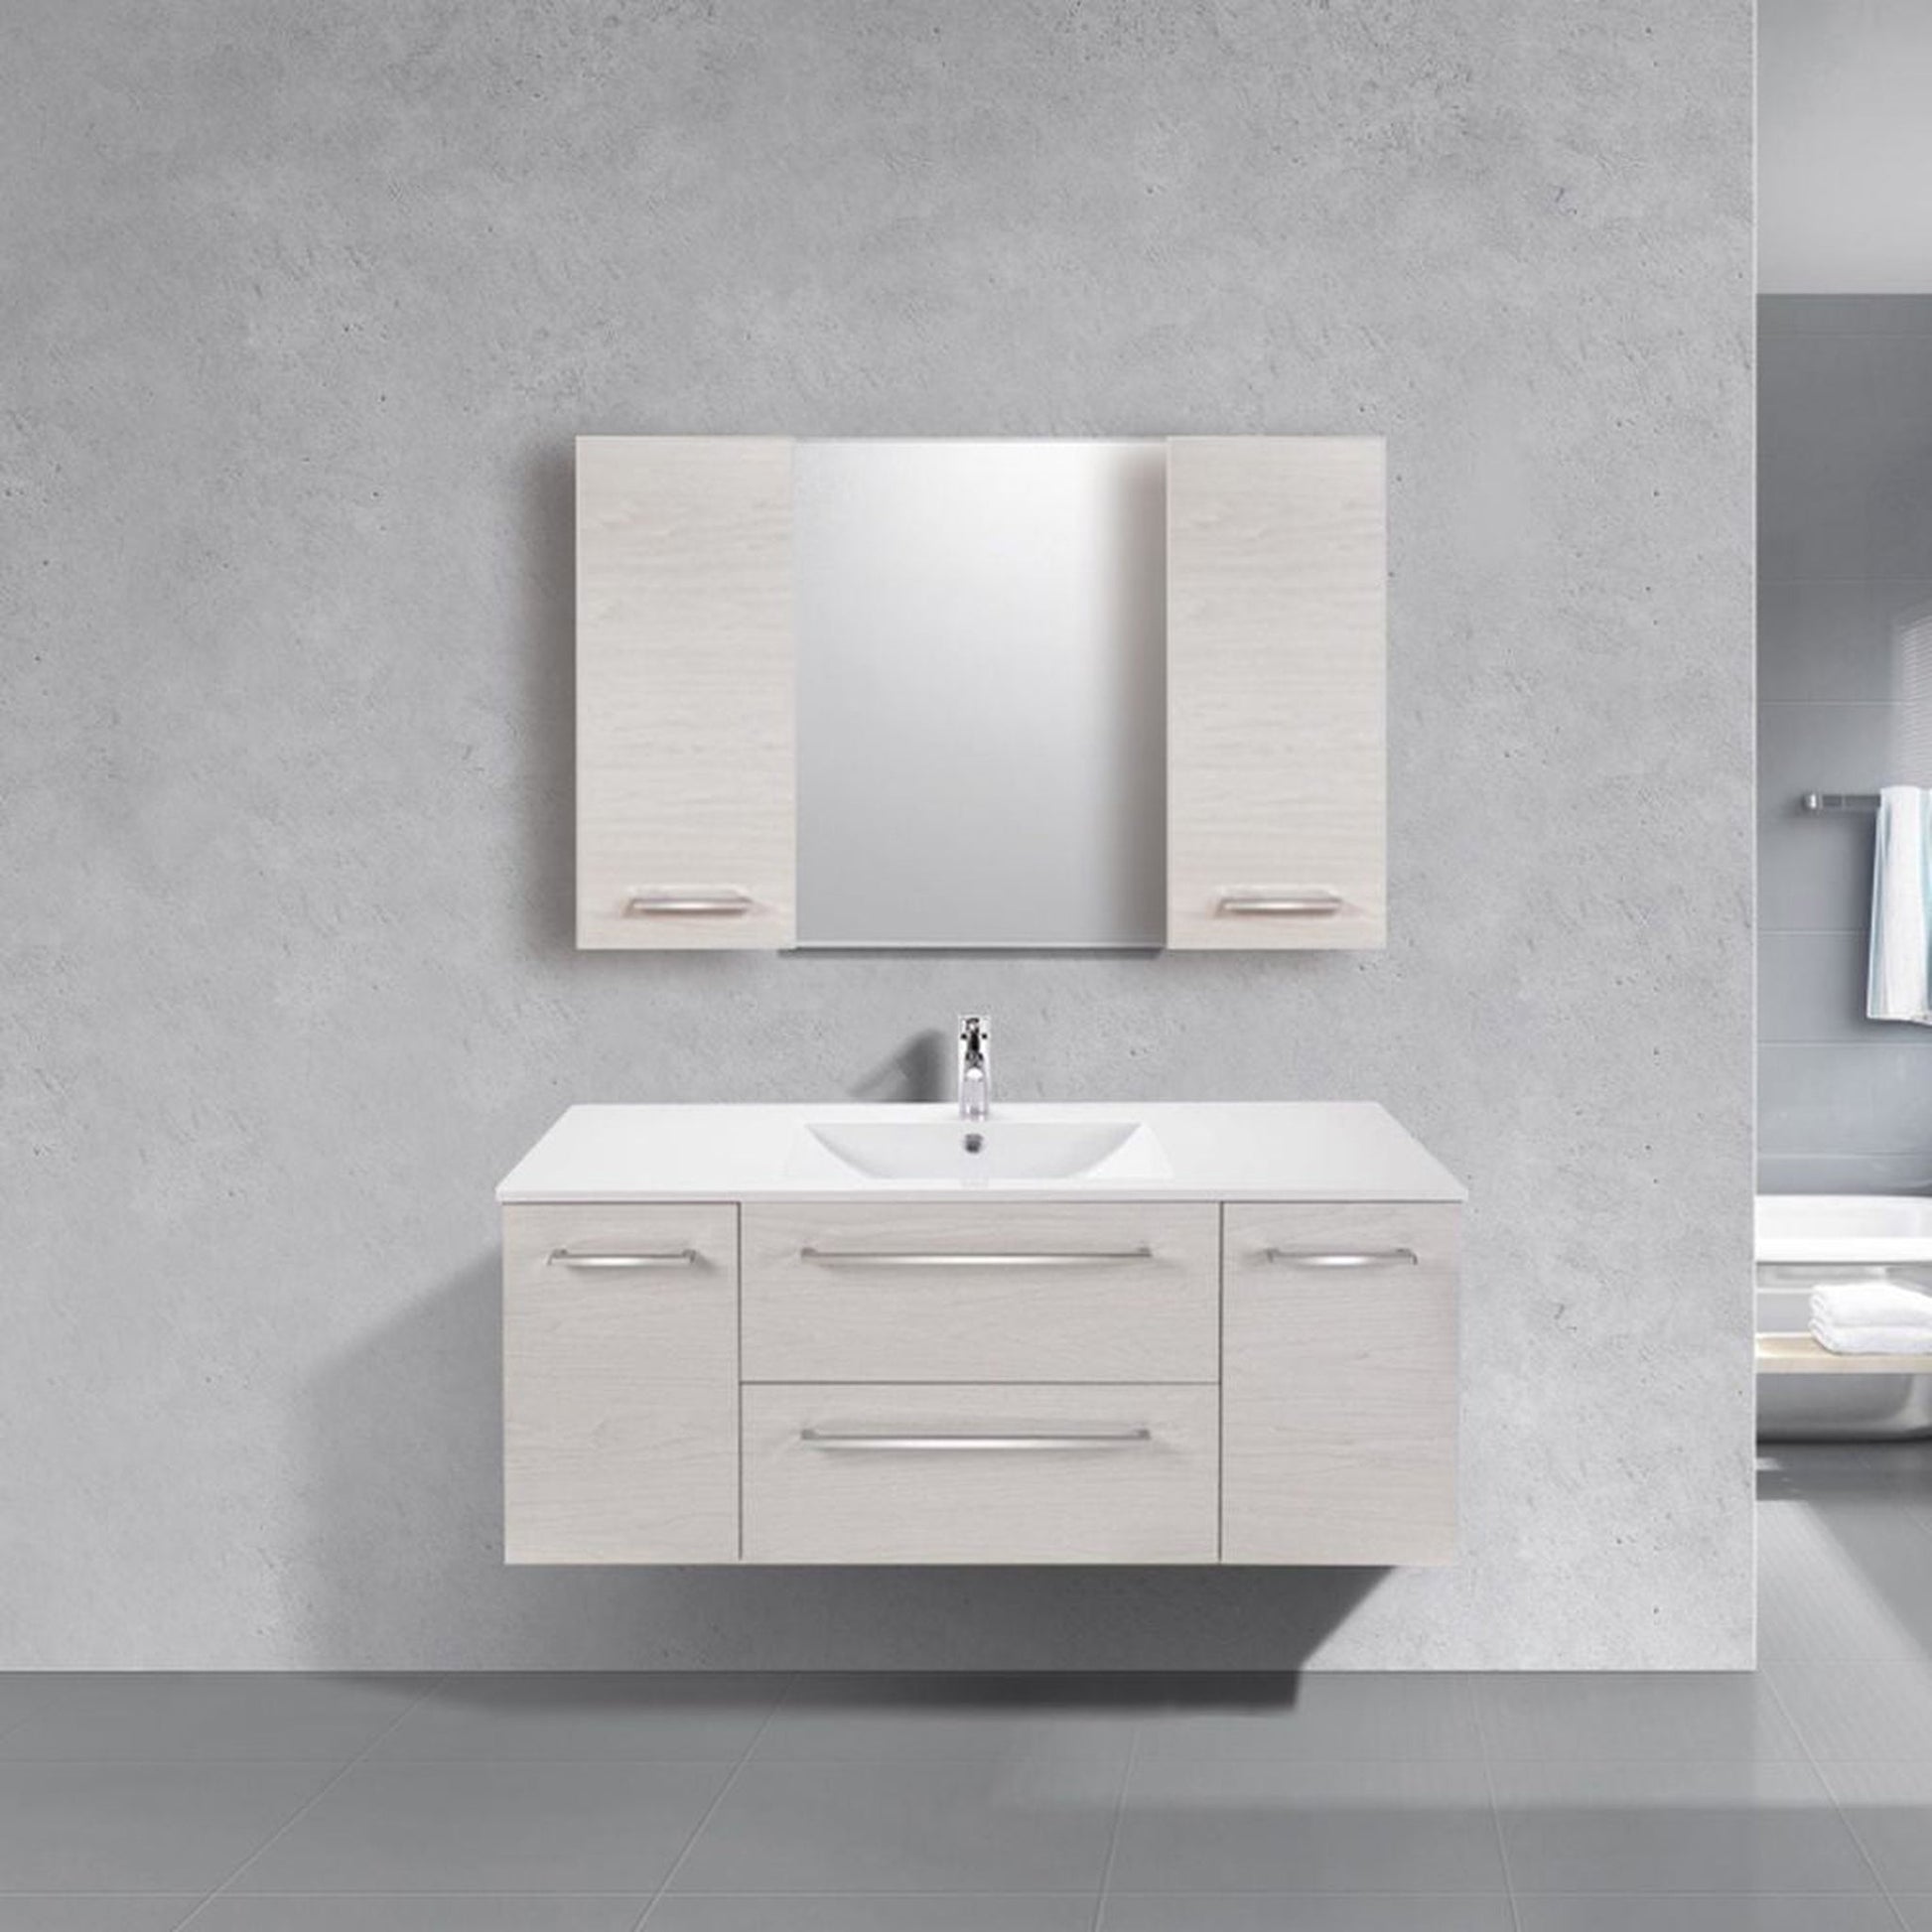 Abby Bath Aiden 48” x 20” Wall-Mounted Vanity in Winter White Finish With Two Drawers and Chrome Handles